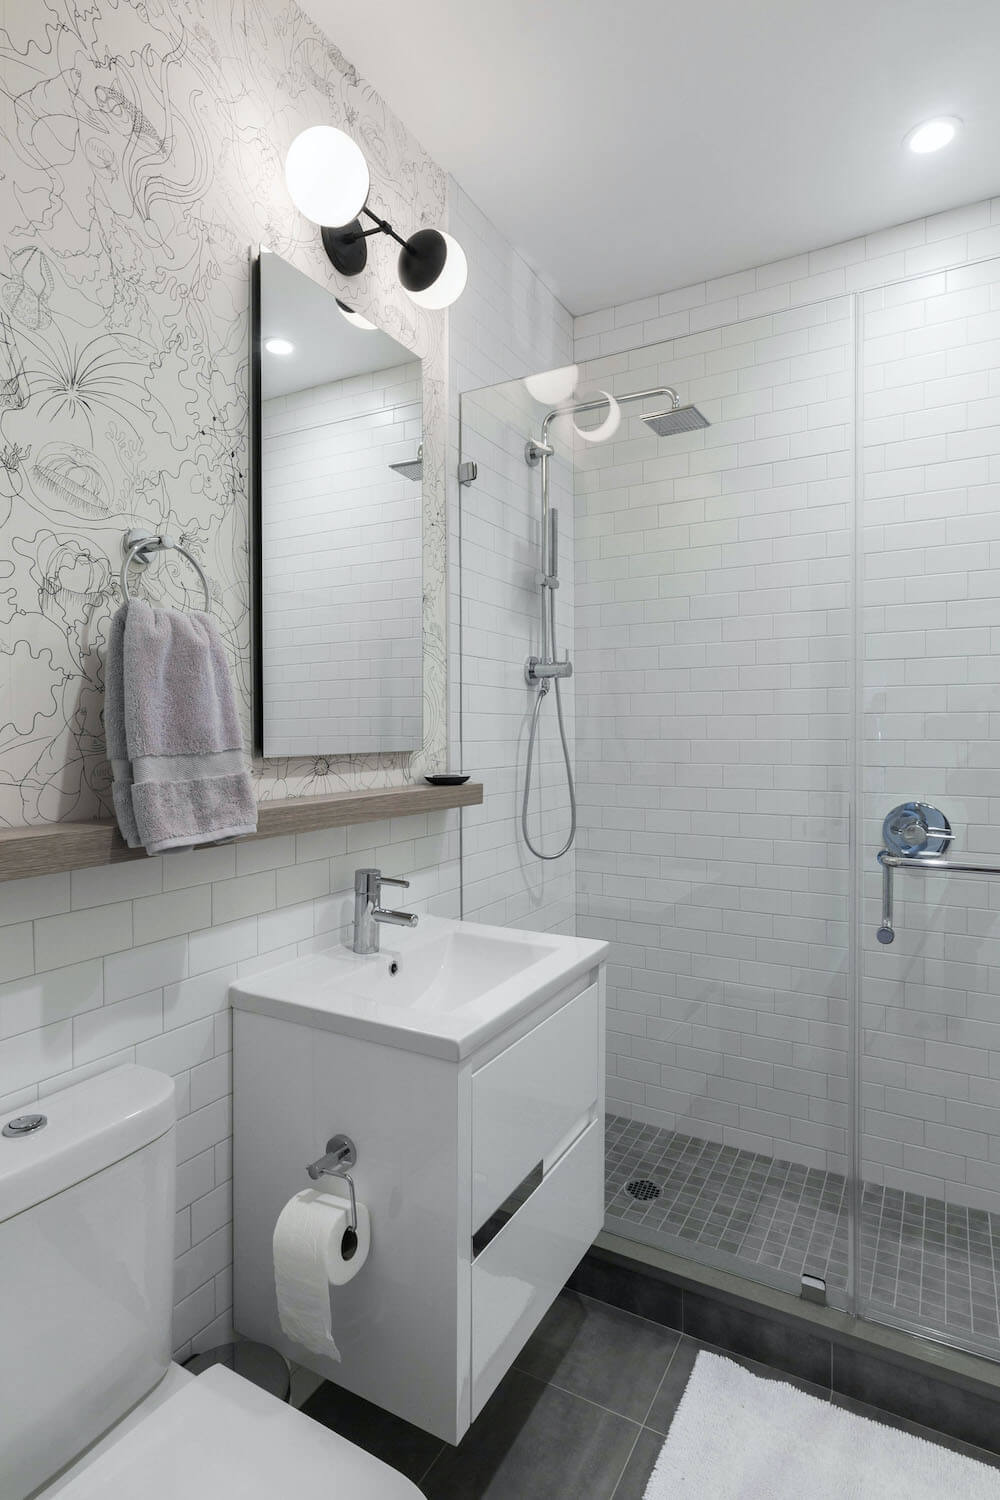 bathroom vanity with mirror and wall mounted light and wood trim and walk-in shower with white subway wall tiles and glass door and chrome shower head and fixtures and dark gray floor tiles after renovation